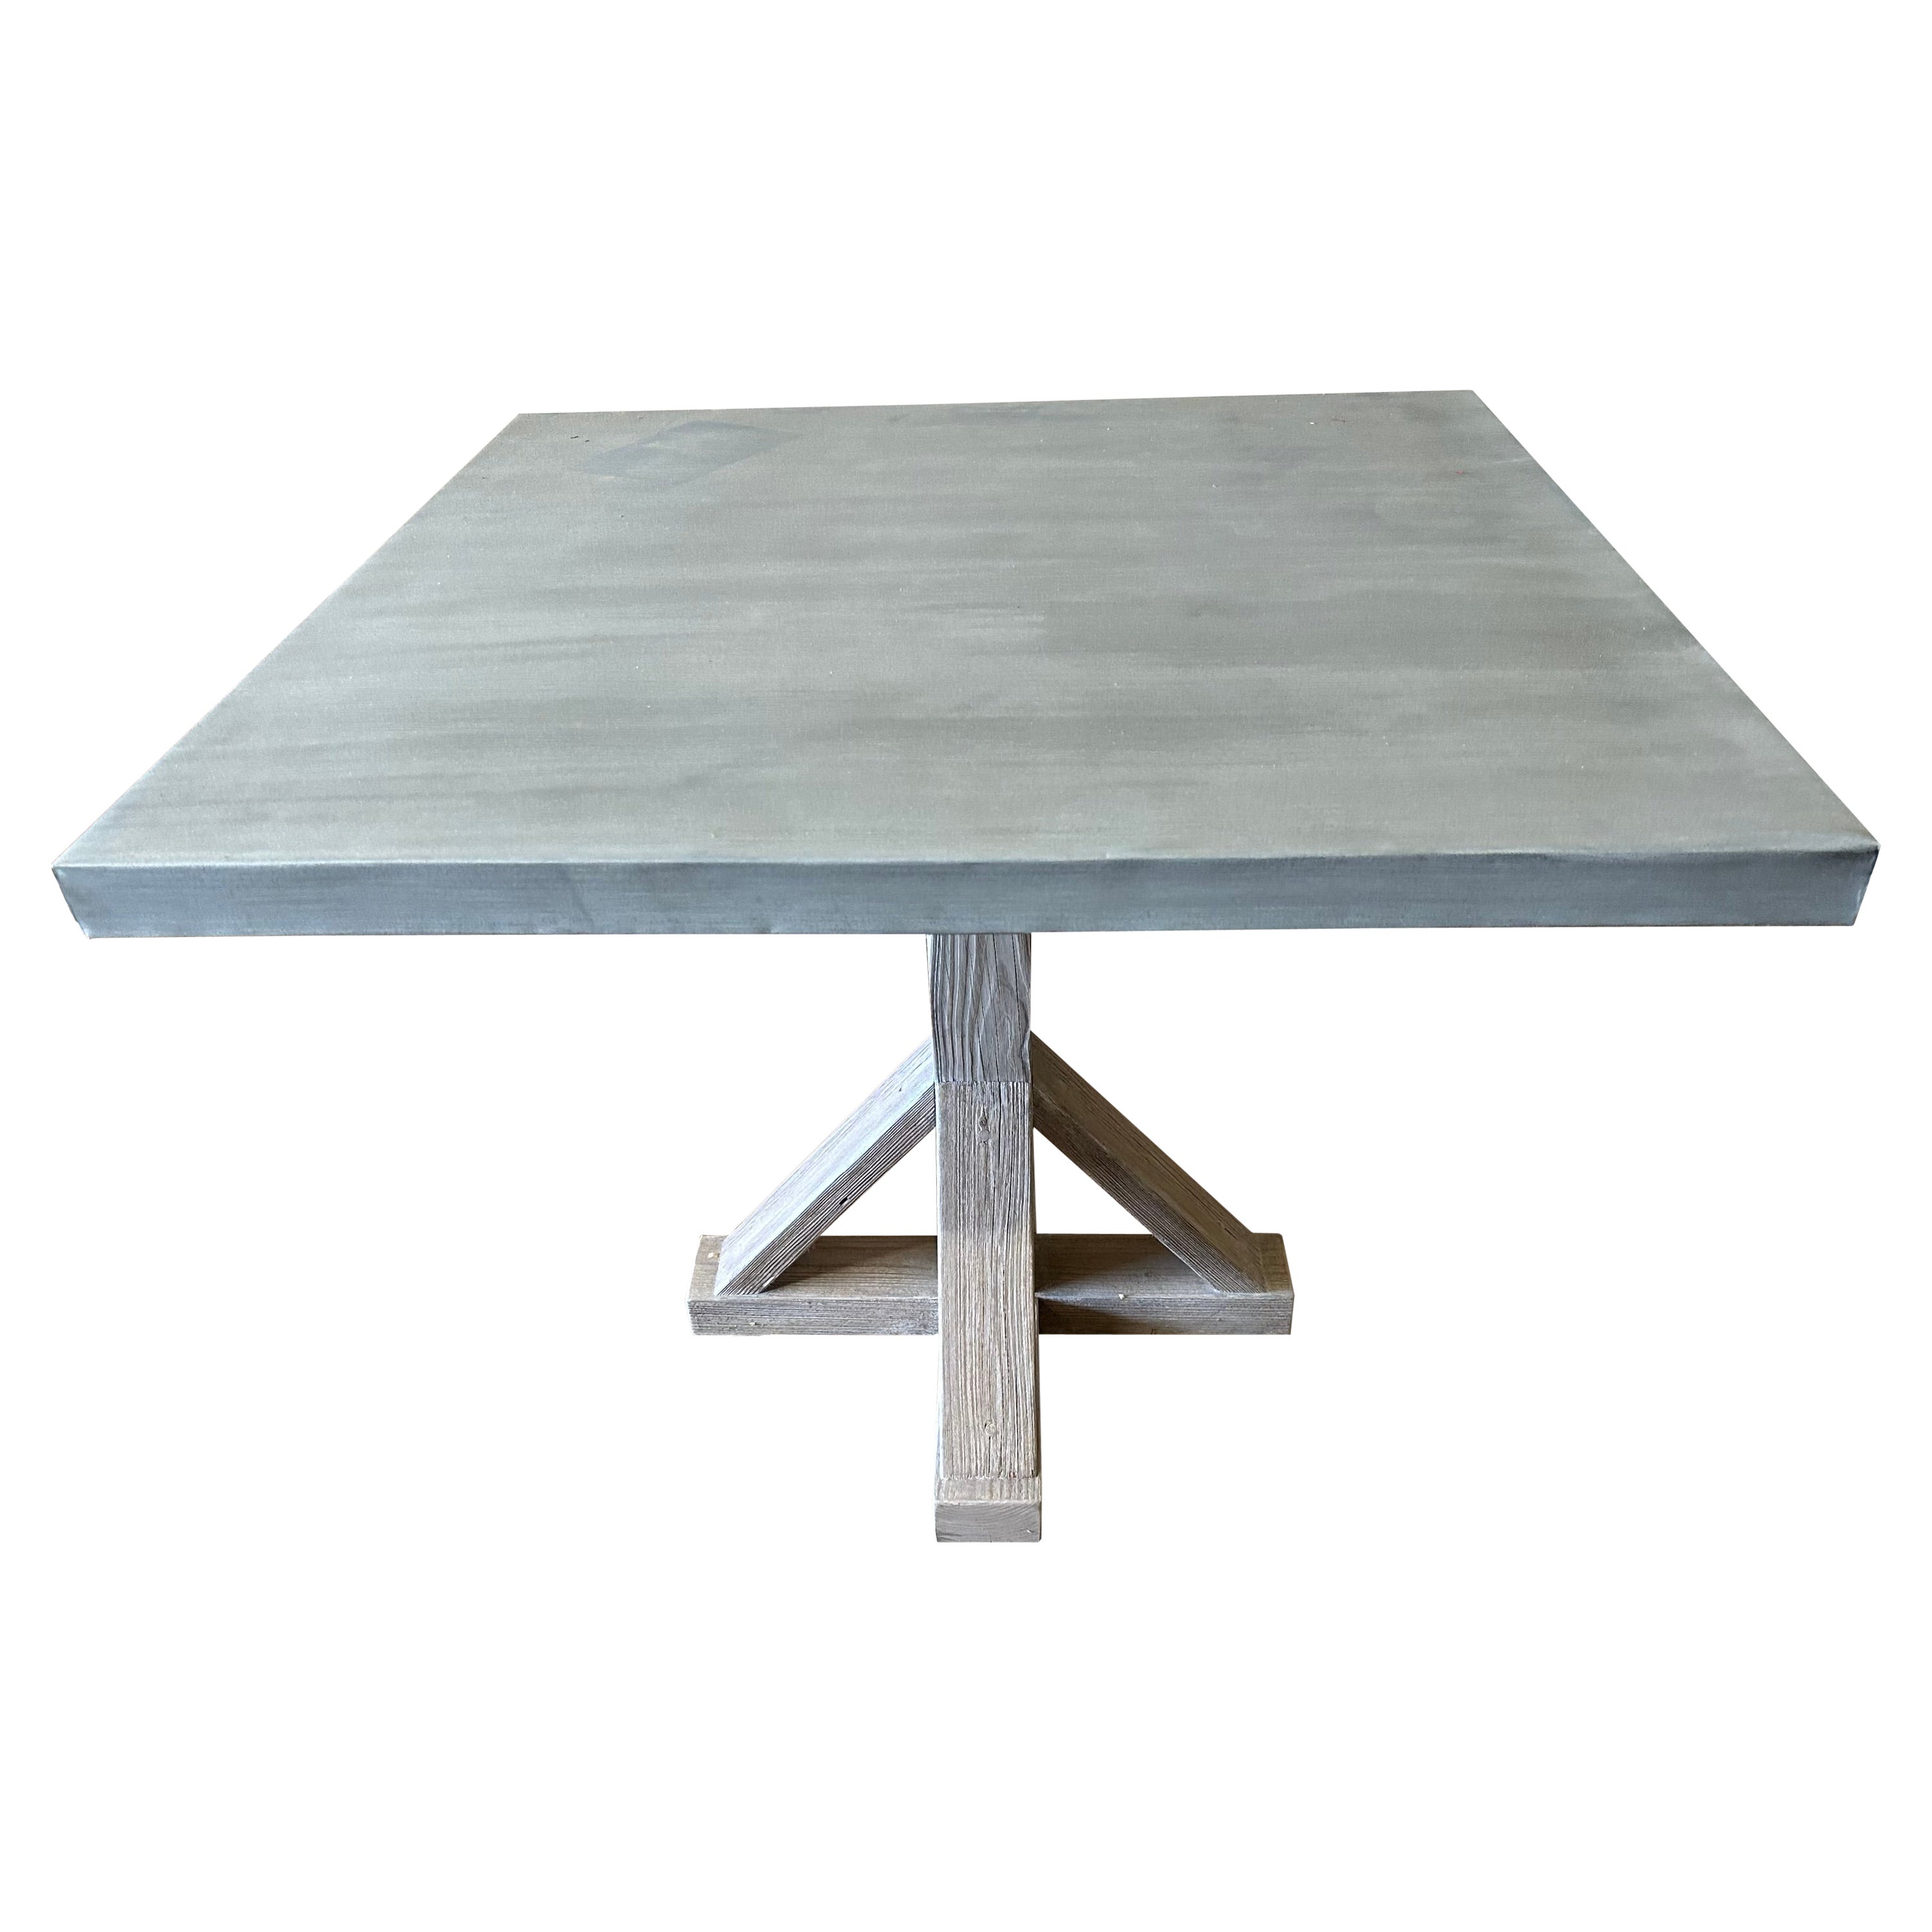 Square Zinc top dining table